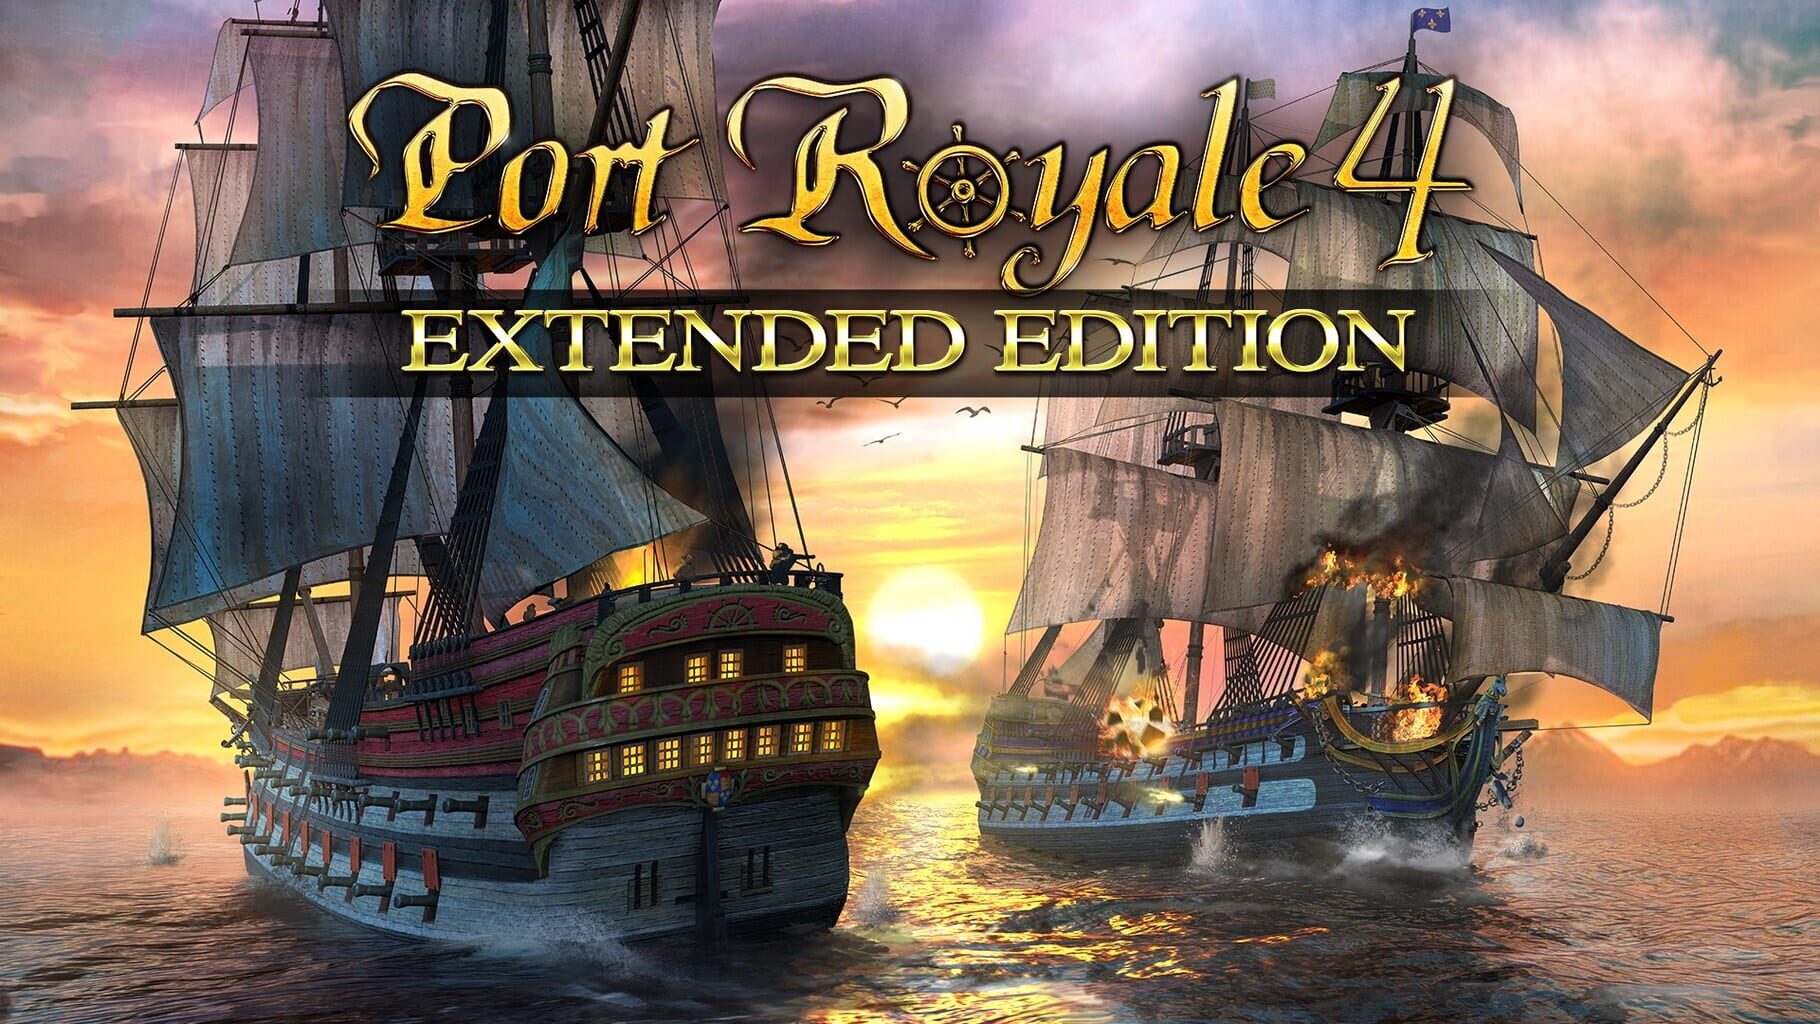 Arte - Port Royale 4: Extended Edition